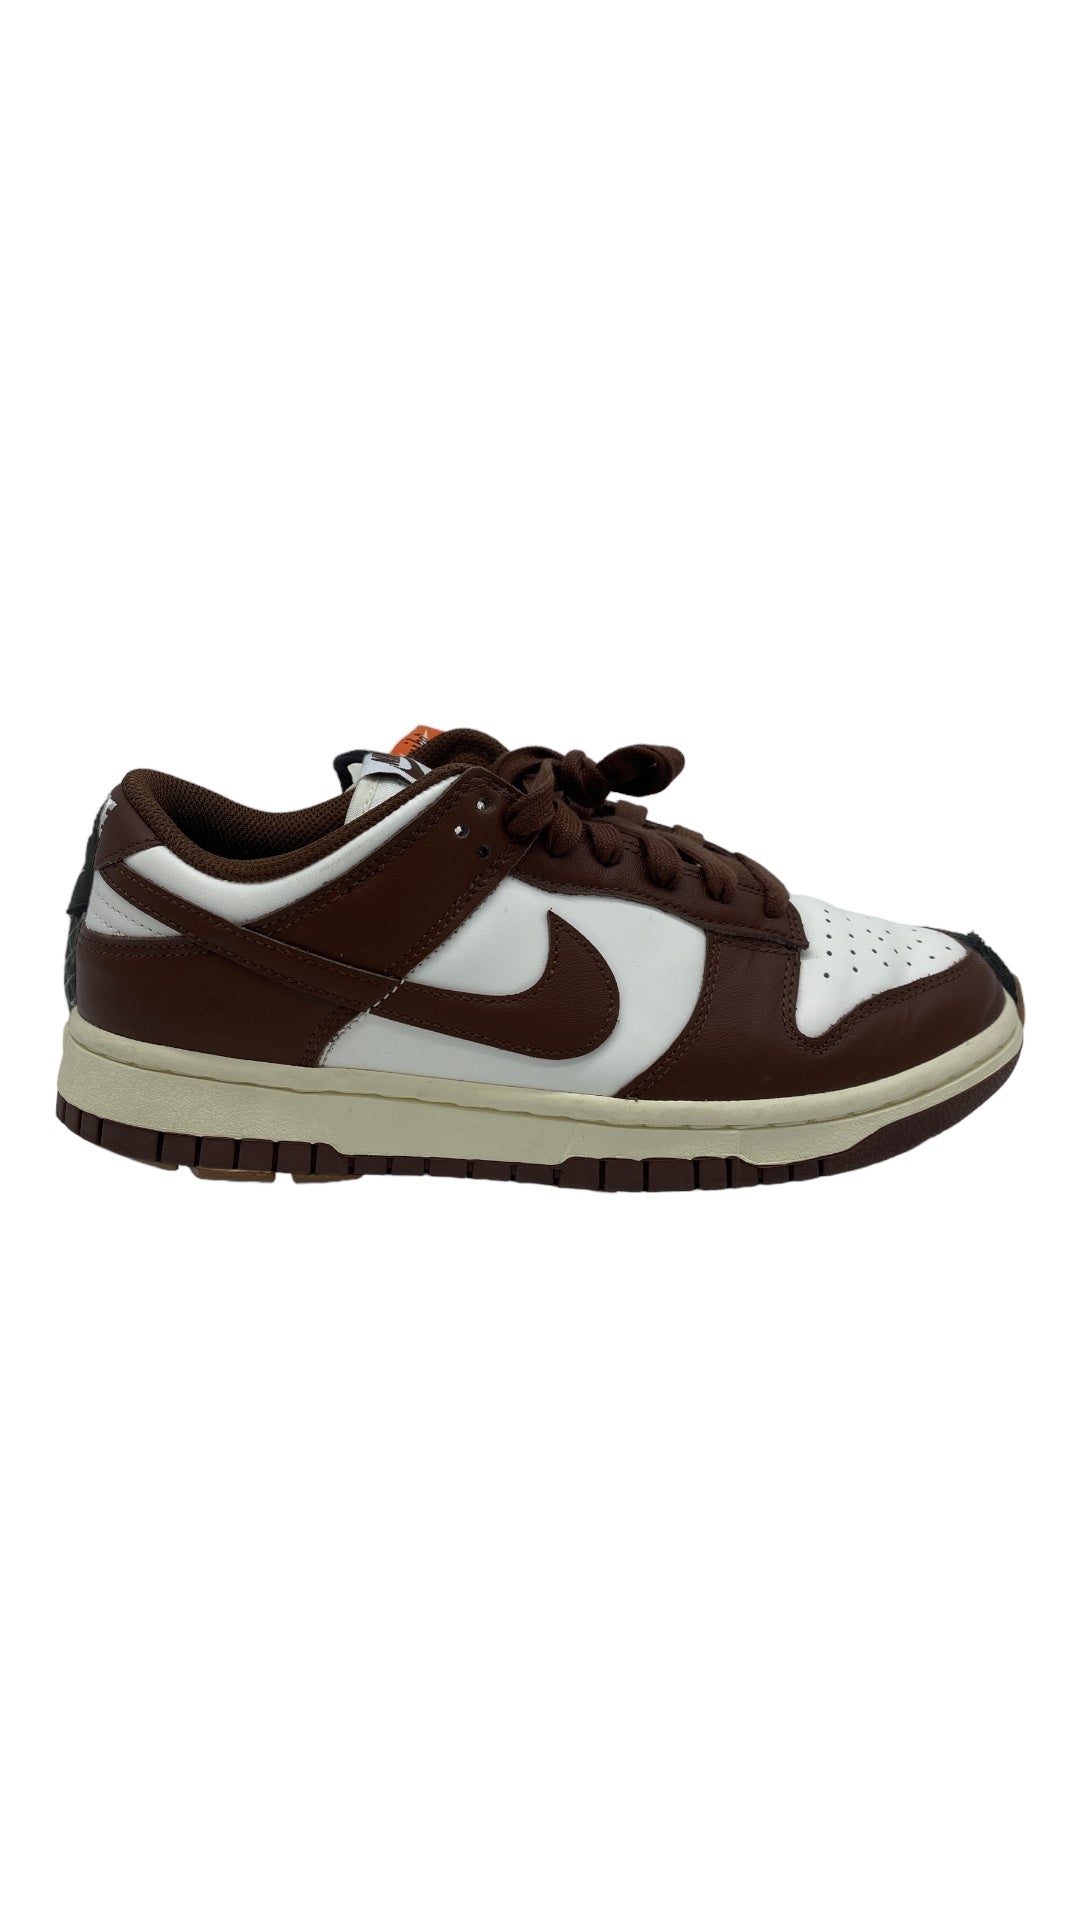 Preowned Nike Dunk Low Cacao Wow Sz 9W/7.5M